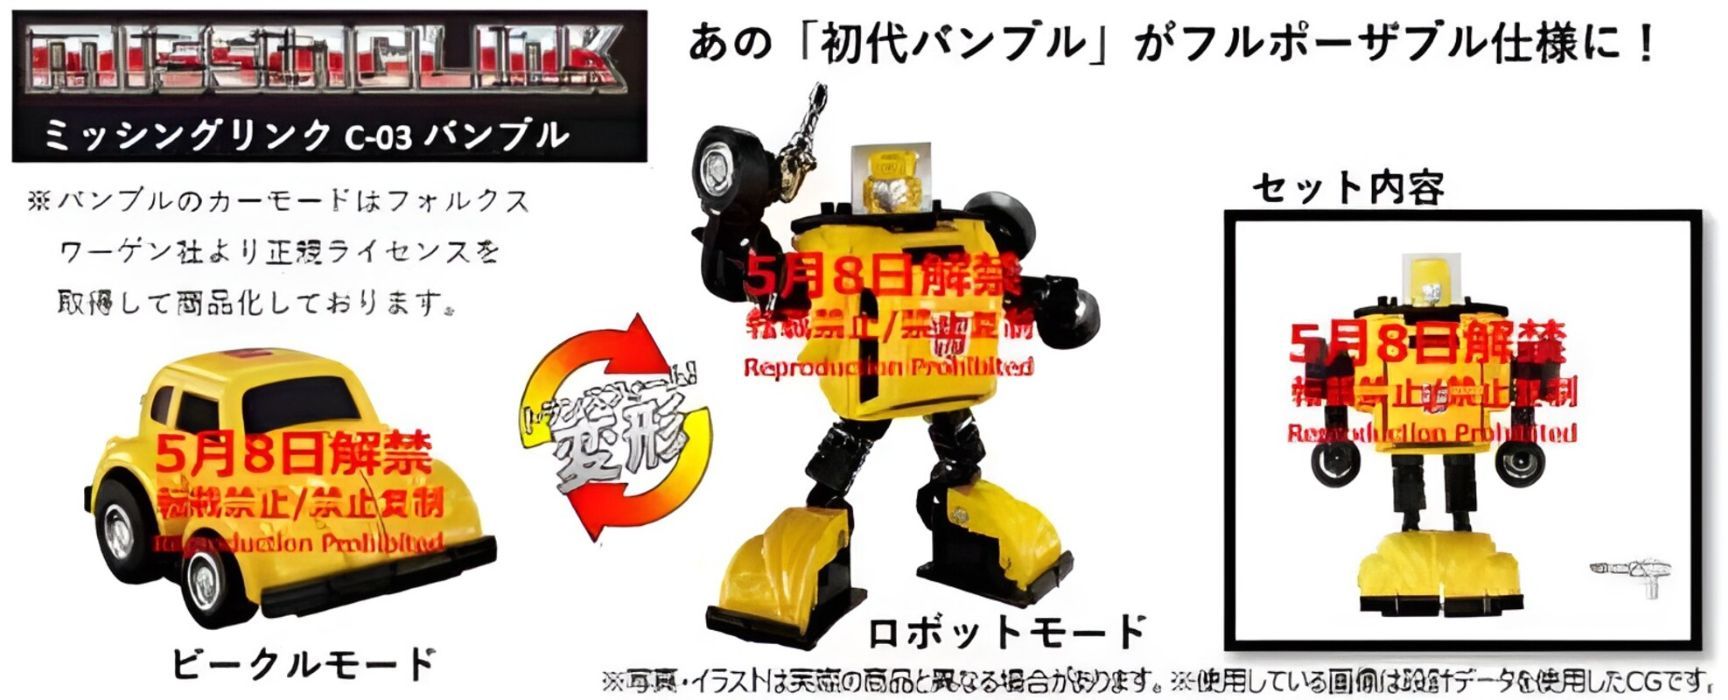 Transformers Missing Link Toyline Adds G1 Bumblebee and Cliffjumper